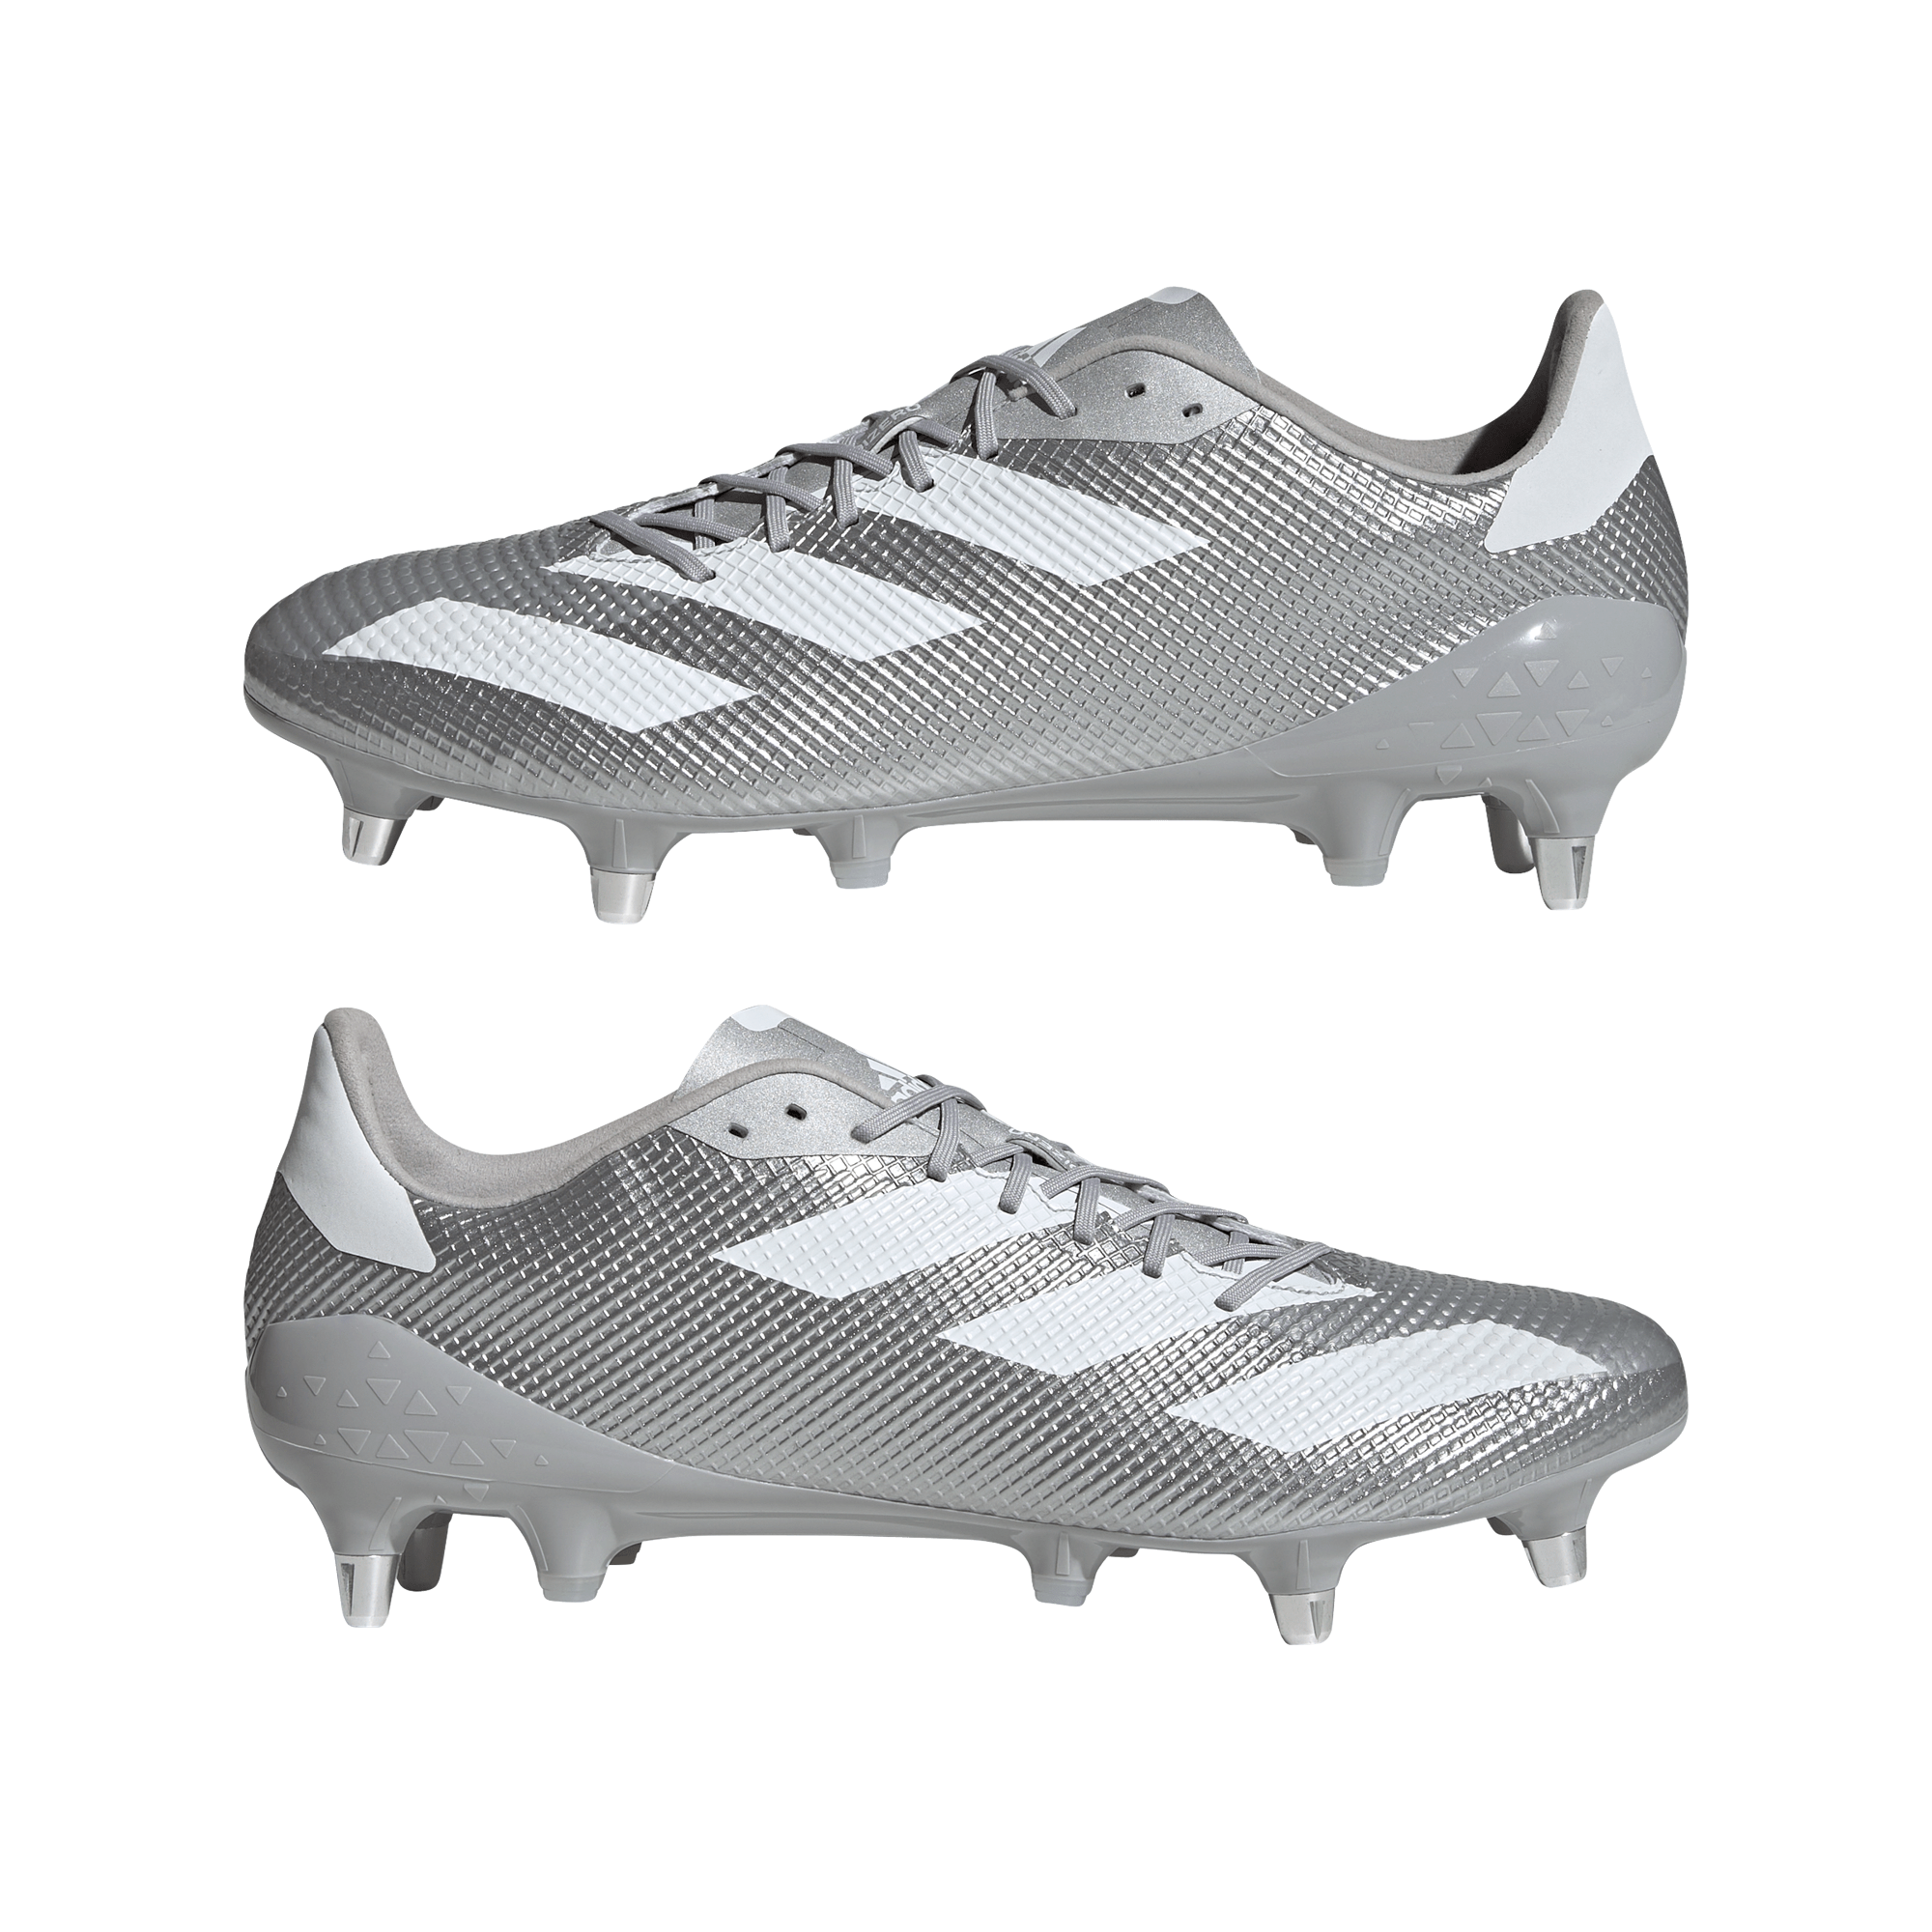 Adidas Adizero RS7 SG Rugby Cleat - Ground Boot - Silver - SKU GX5390 - World Rugby